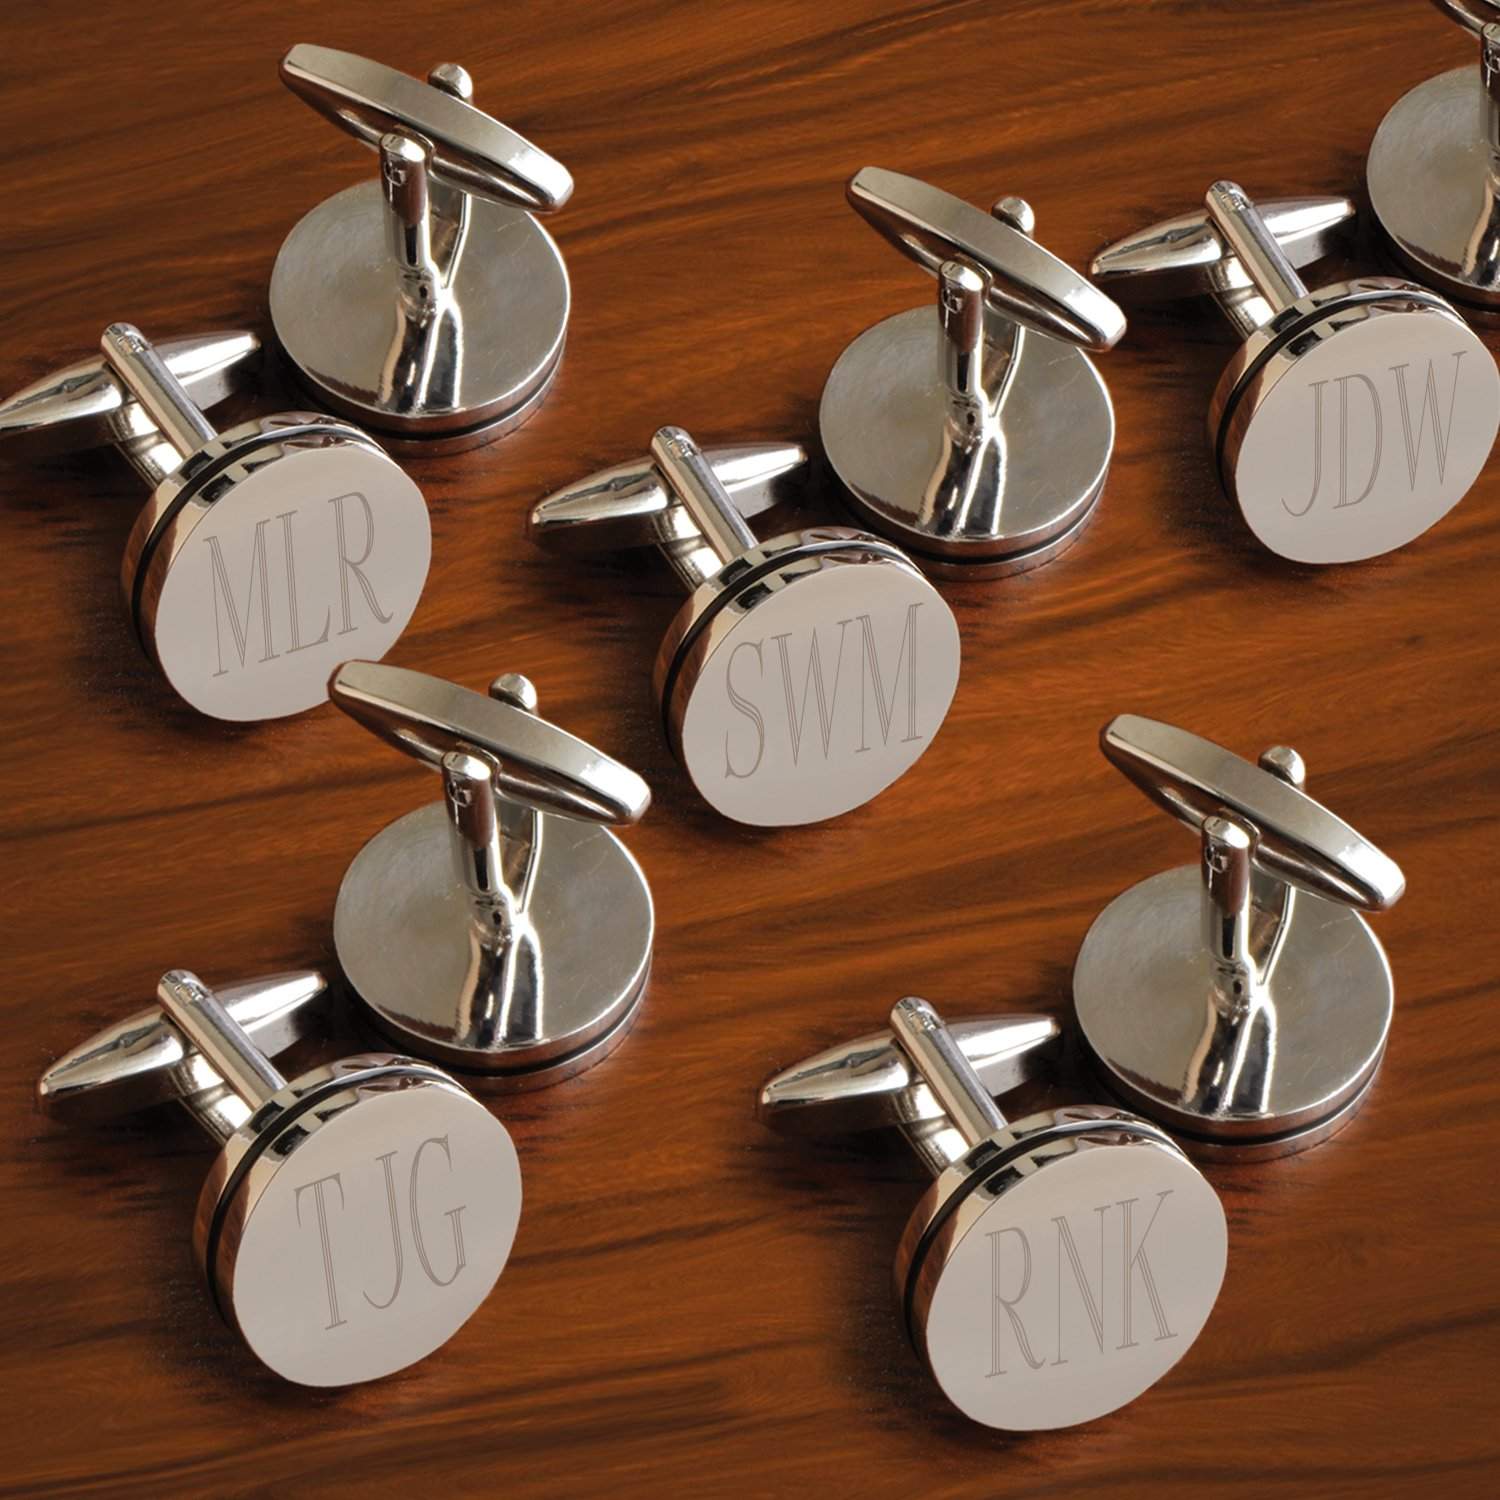 Personalized Engraved Pin Stripe Cufflinks Set of 5